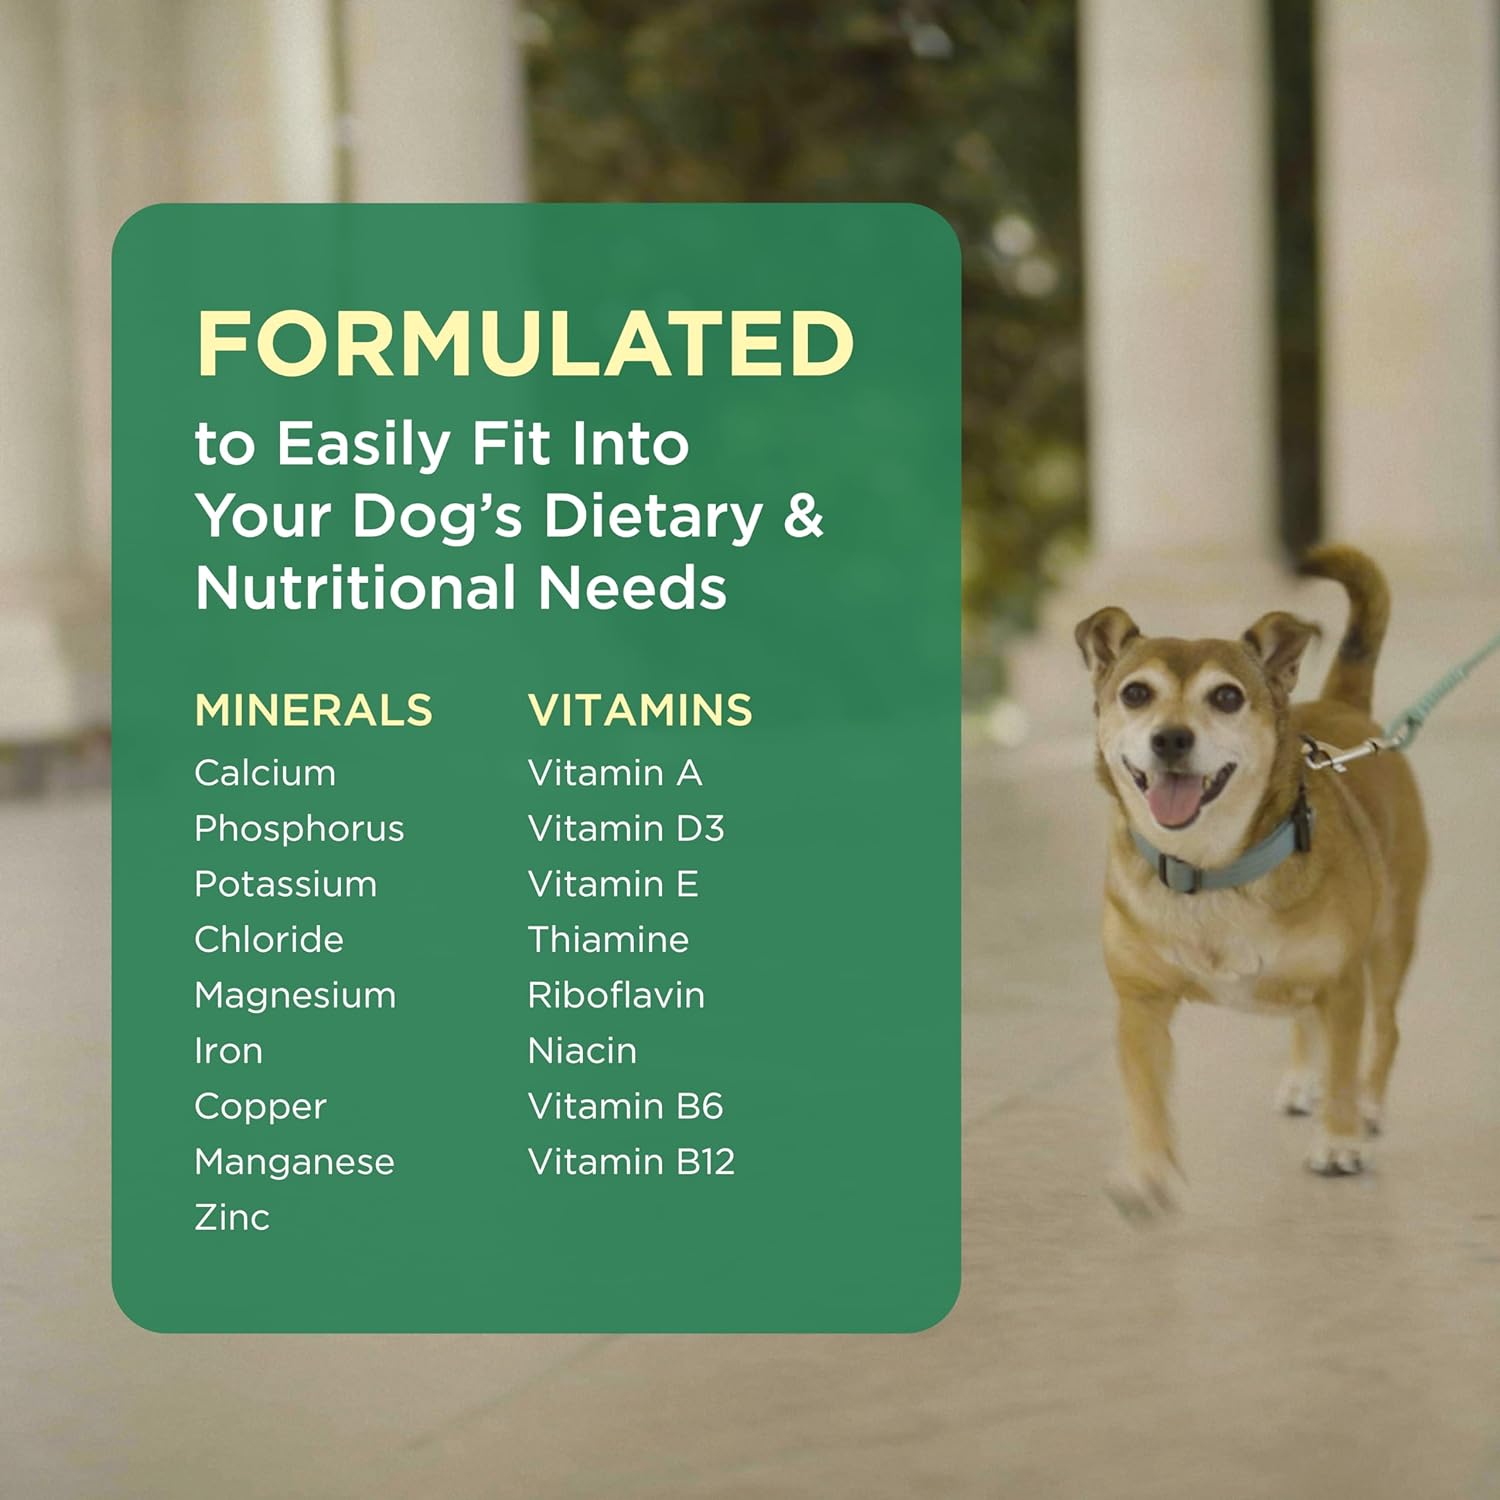 Pet-Tabs Multivitamin and Mineral Supplement for Dogs with Special Nutritional Needs, Chewable Tablet, 180 Count Bottle : Pet Multivitamins : Pet Supplies